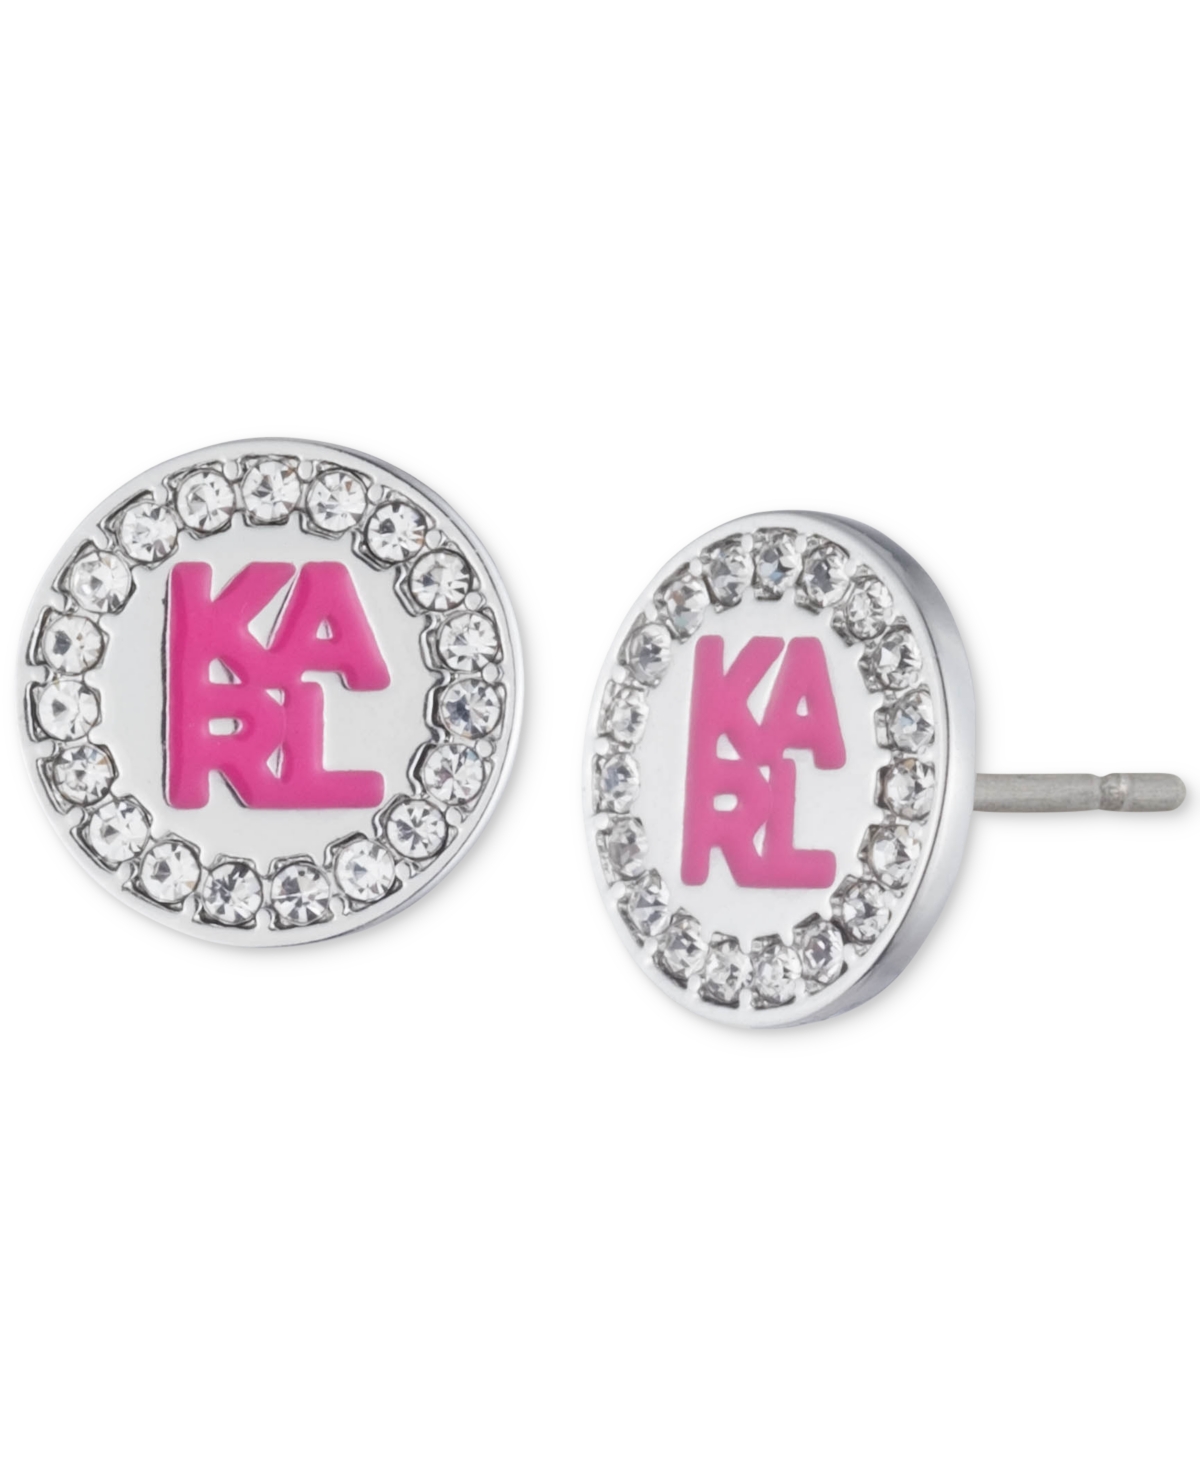 Silver-Tone Pave Logo Stud Earrings - Pink